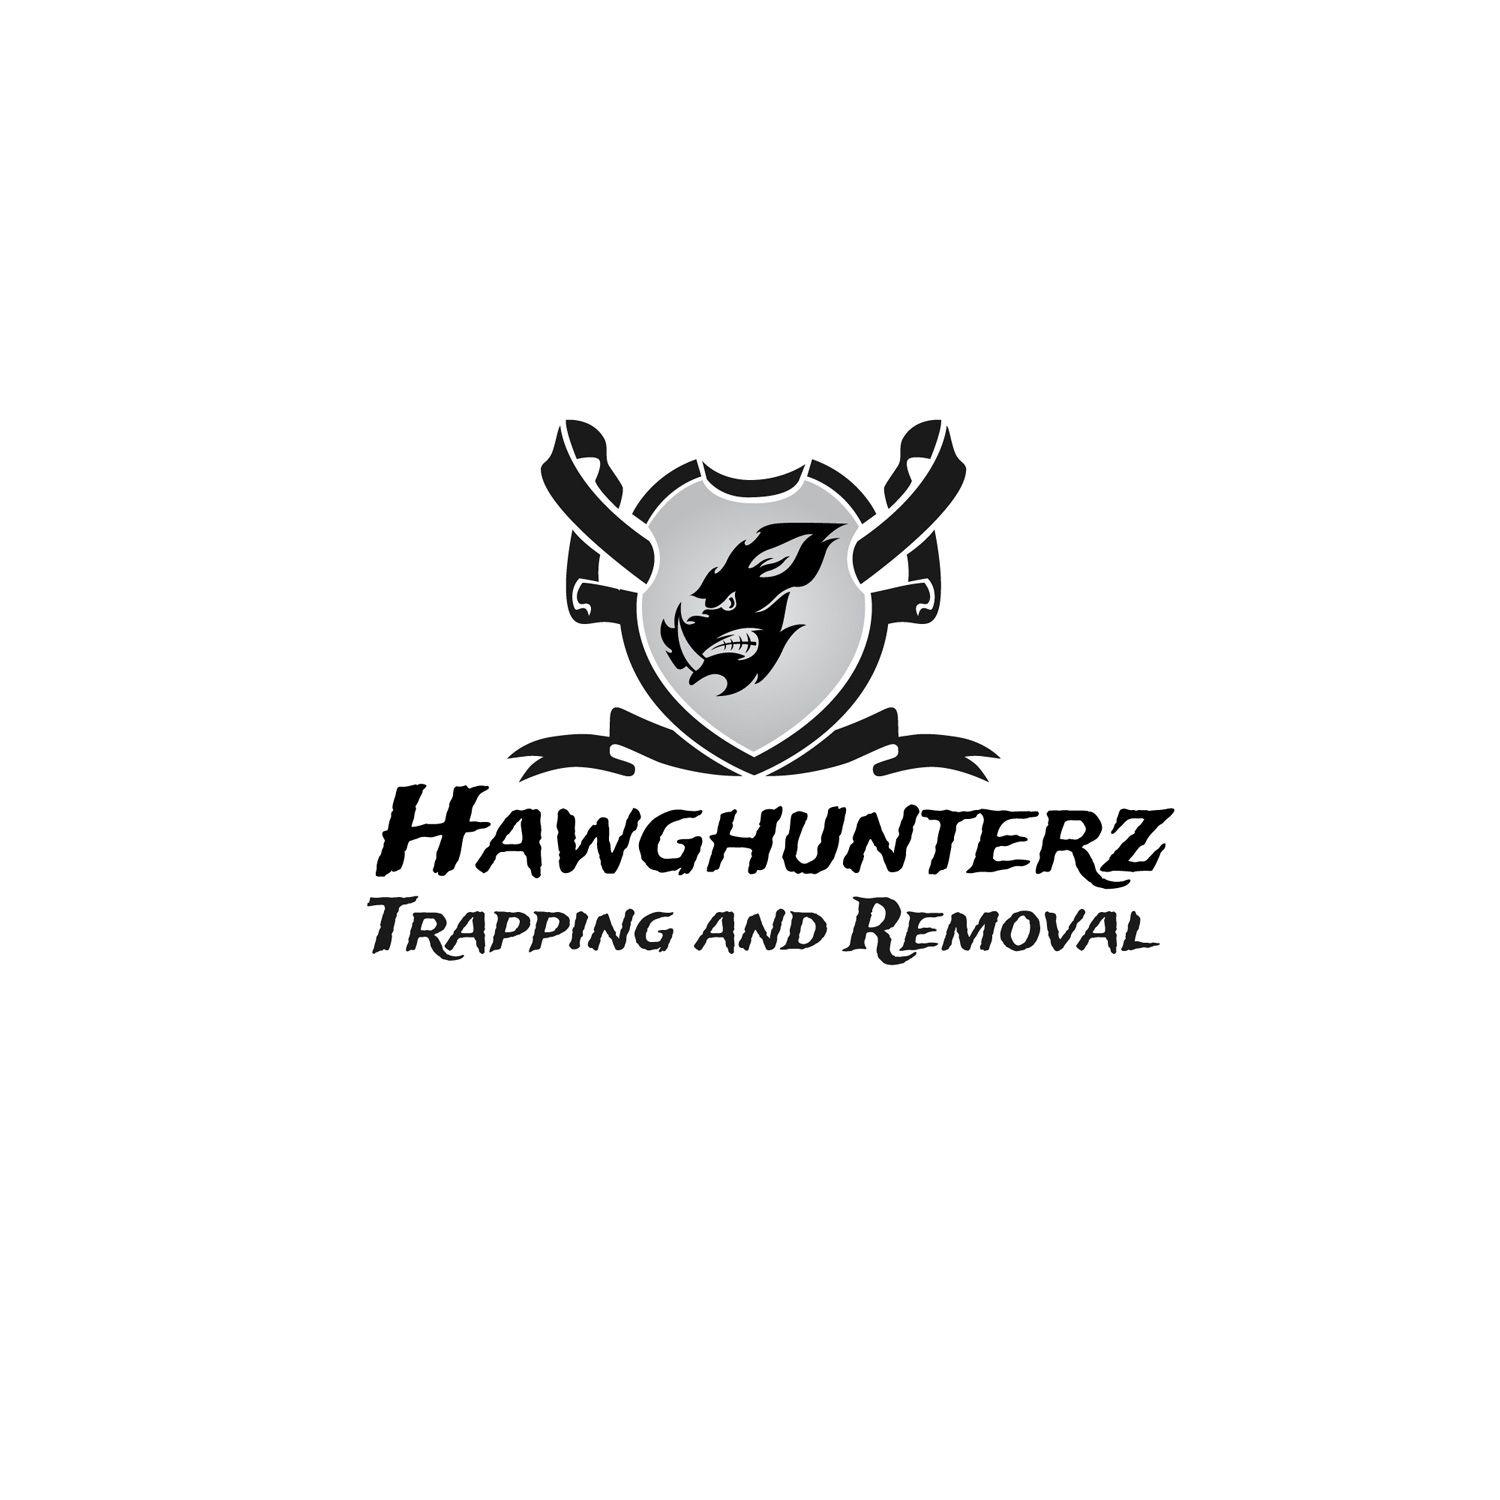 Trapping Logo - Masculine, Bold, Hunting Logo Design for Hawghunterz Trapping and ...